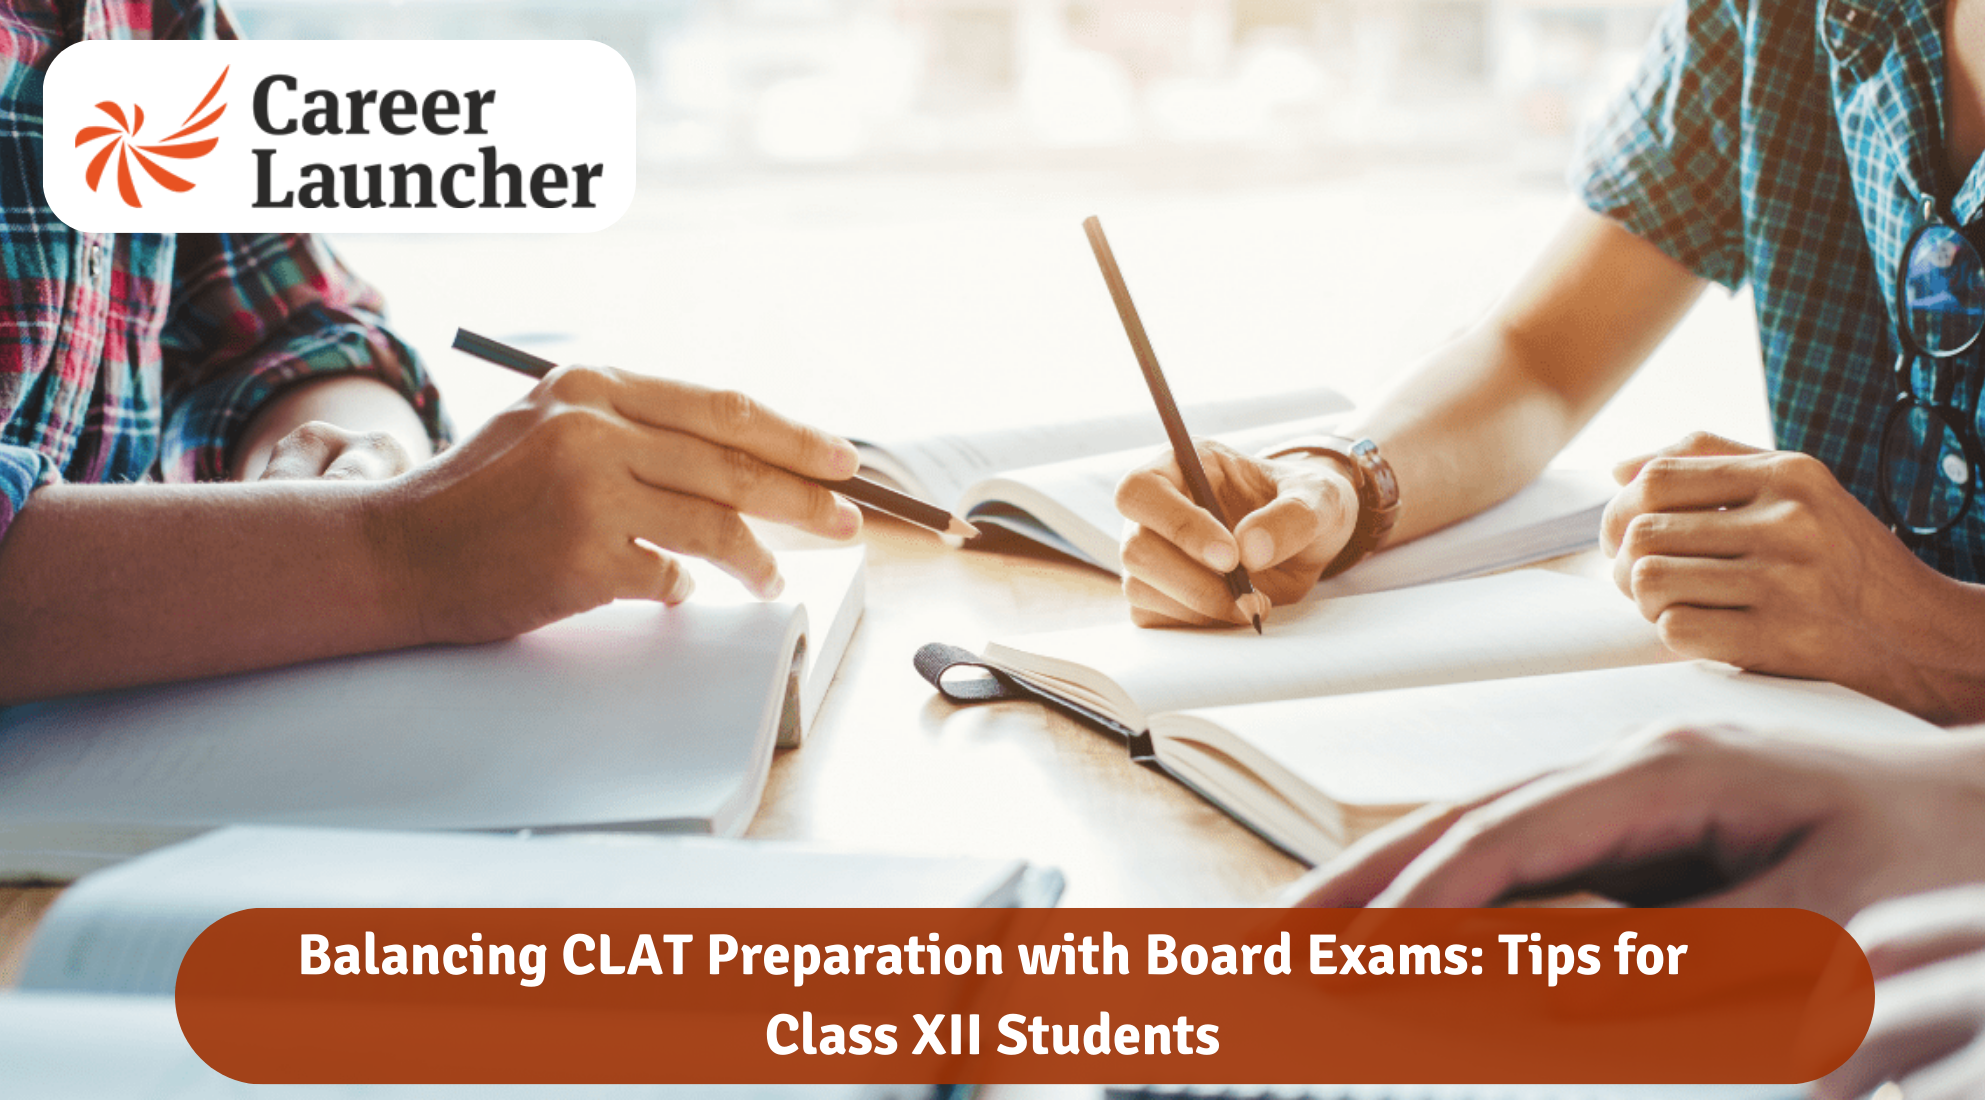 Balancing CLAT Preparation with Board Exams: Tips for Class XII Students